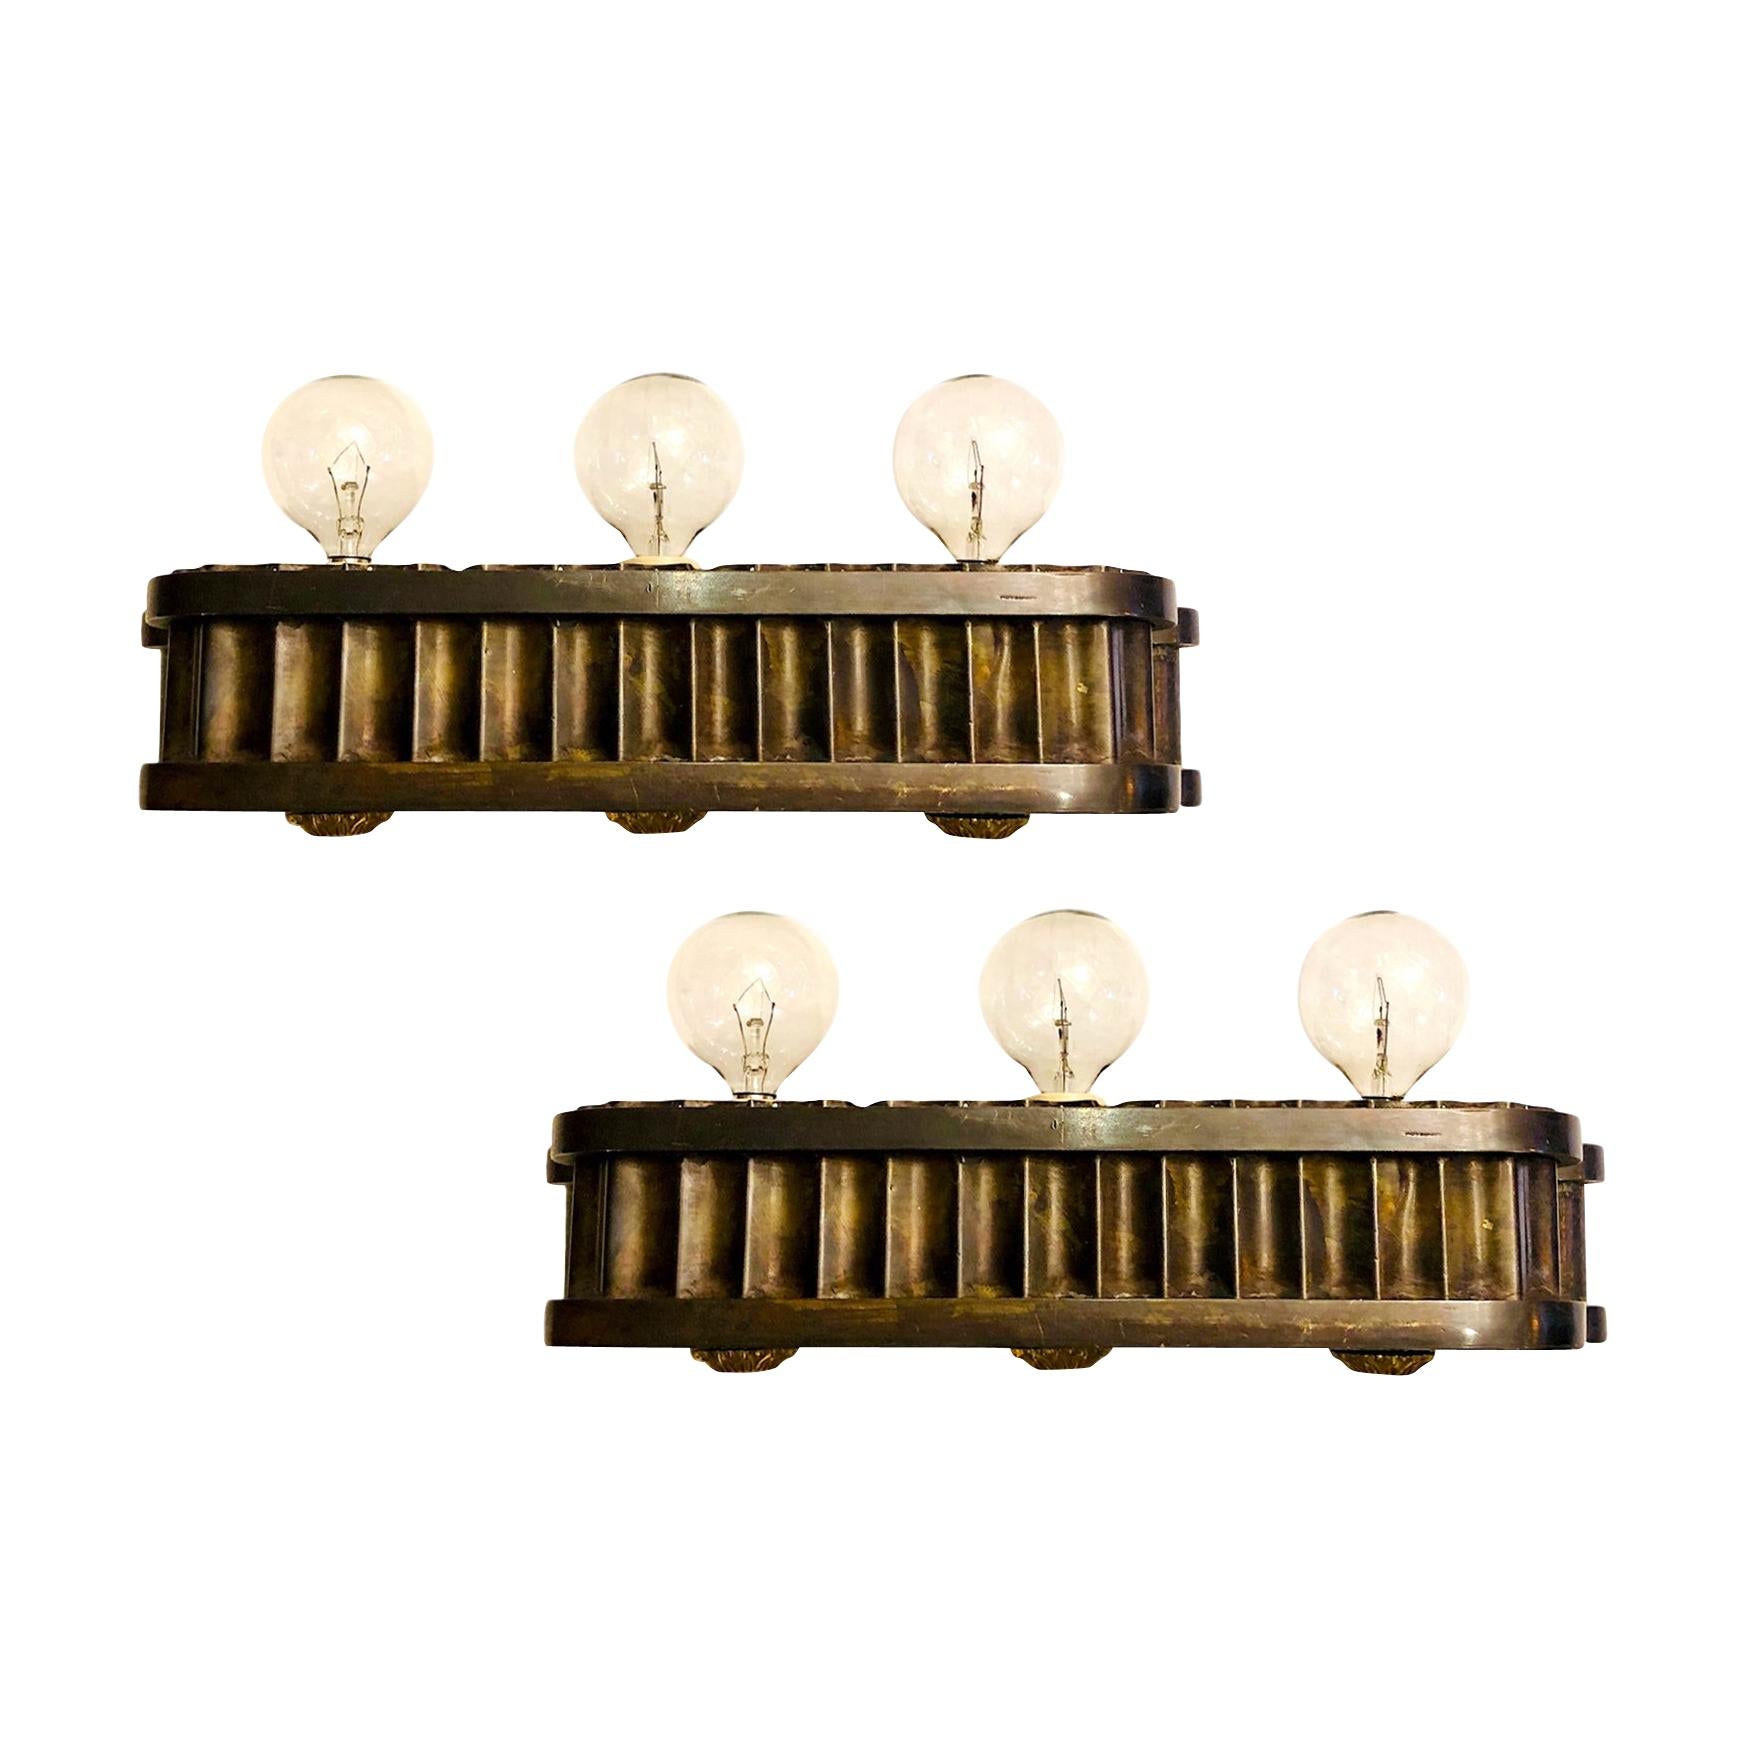 Set of Bronze Three-Light Sconces, Sold in Pairs